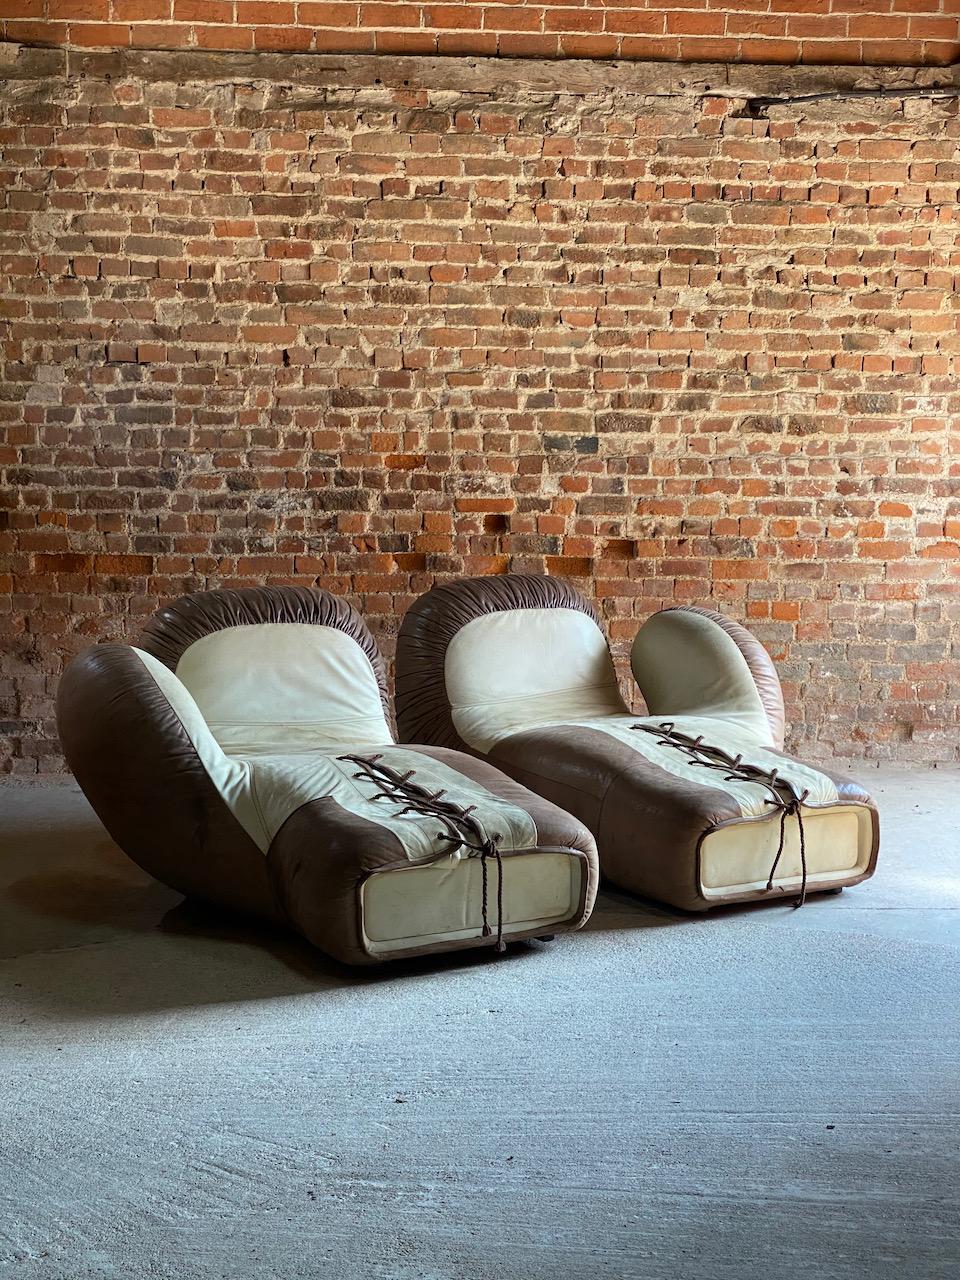 De Sede Model DS-2878 boxing glove sofas, Switzerland, 1978

Magnificent pair of de Sede Model DS-2878 boxing glove sofas or armchairs, Switzerland 1978, manufactured at 7:1 scale and bringing the popular sport of boxing into your home – whether